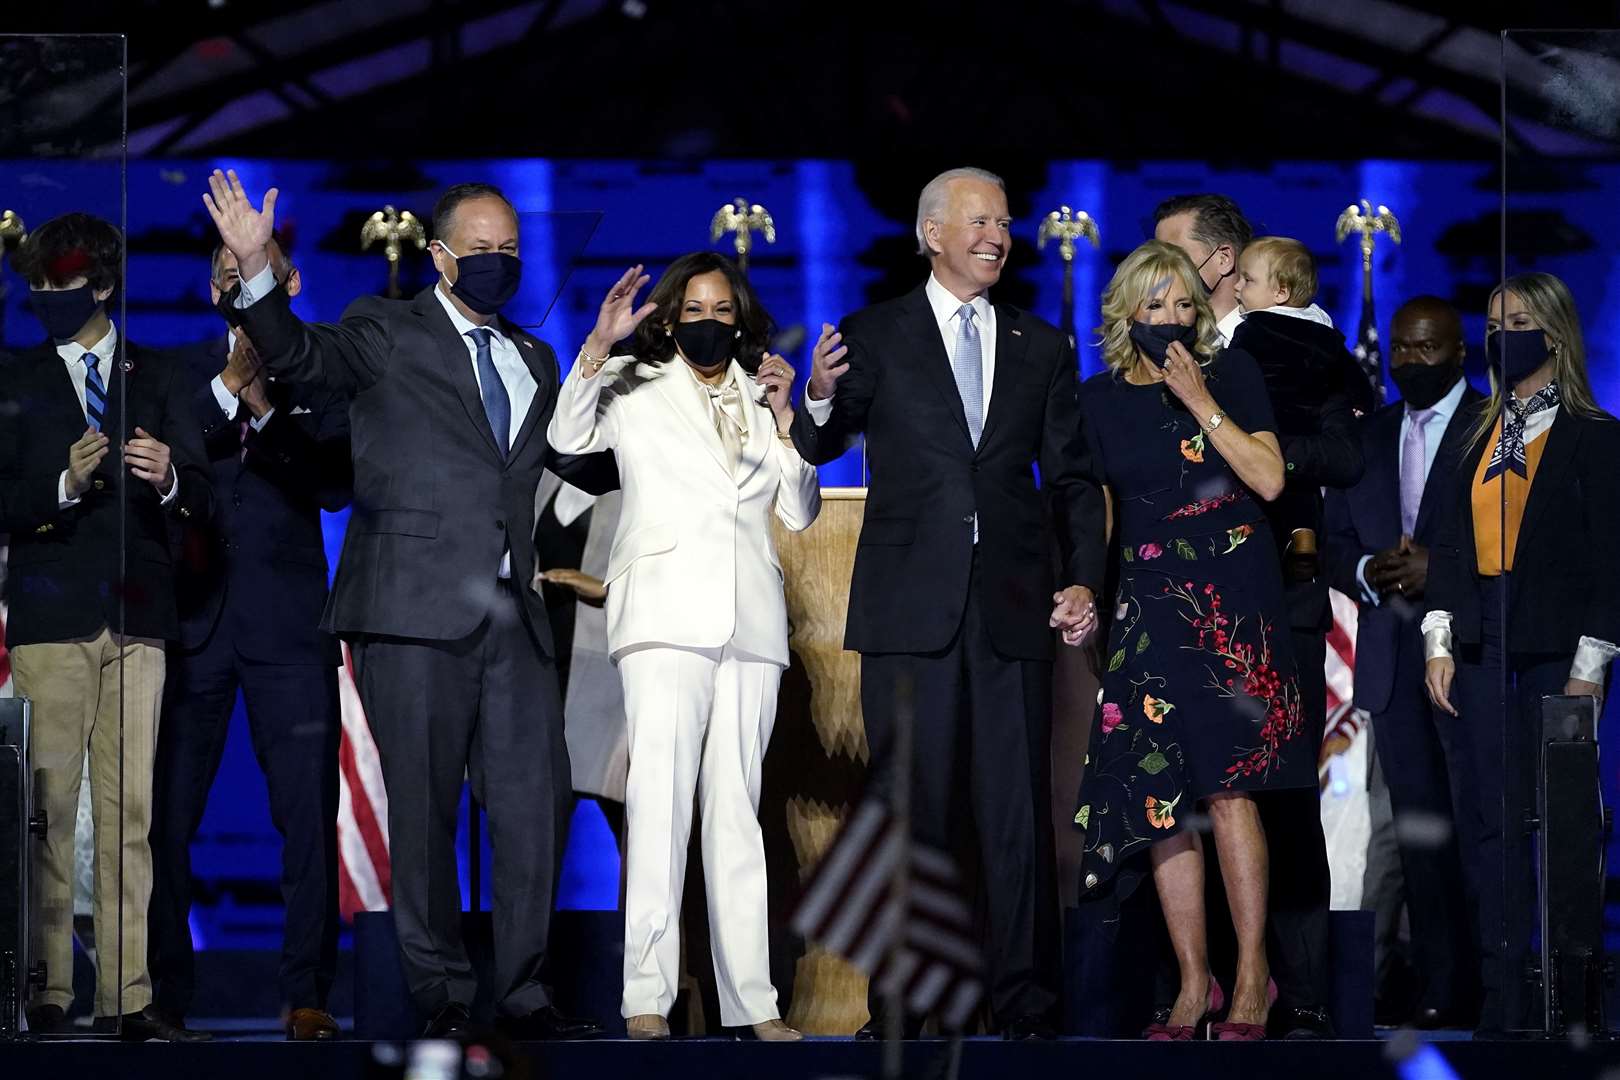 Doug Emhoff, husband of Vice President-elect Kamala Harris, Ms Harris, President-elect Joe Biden and Jill Biden stand on stage together (Andrew Harnik/AP)